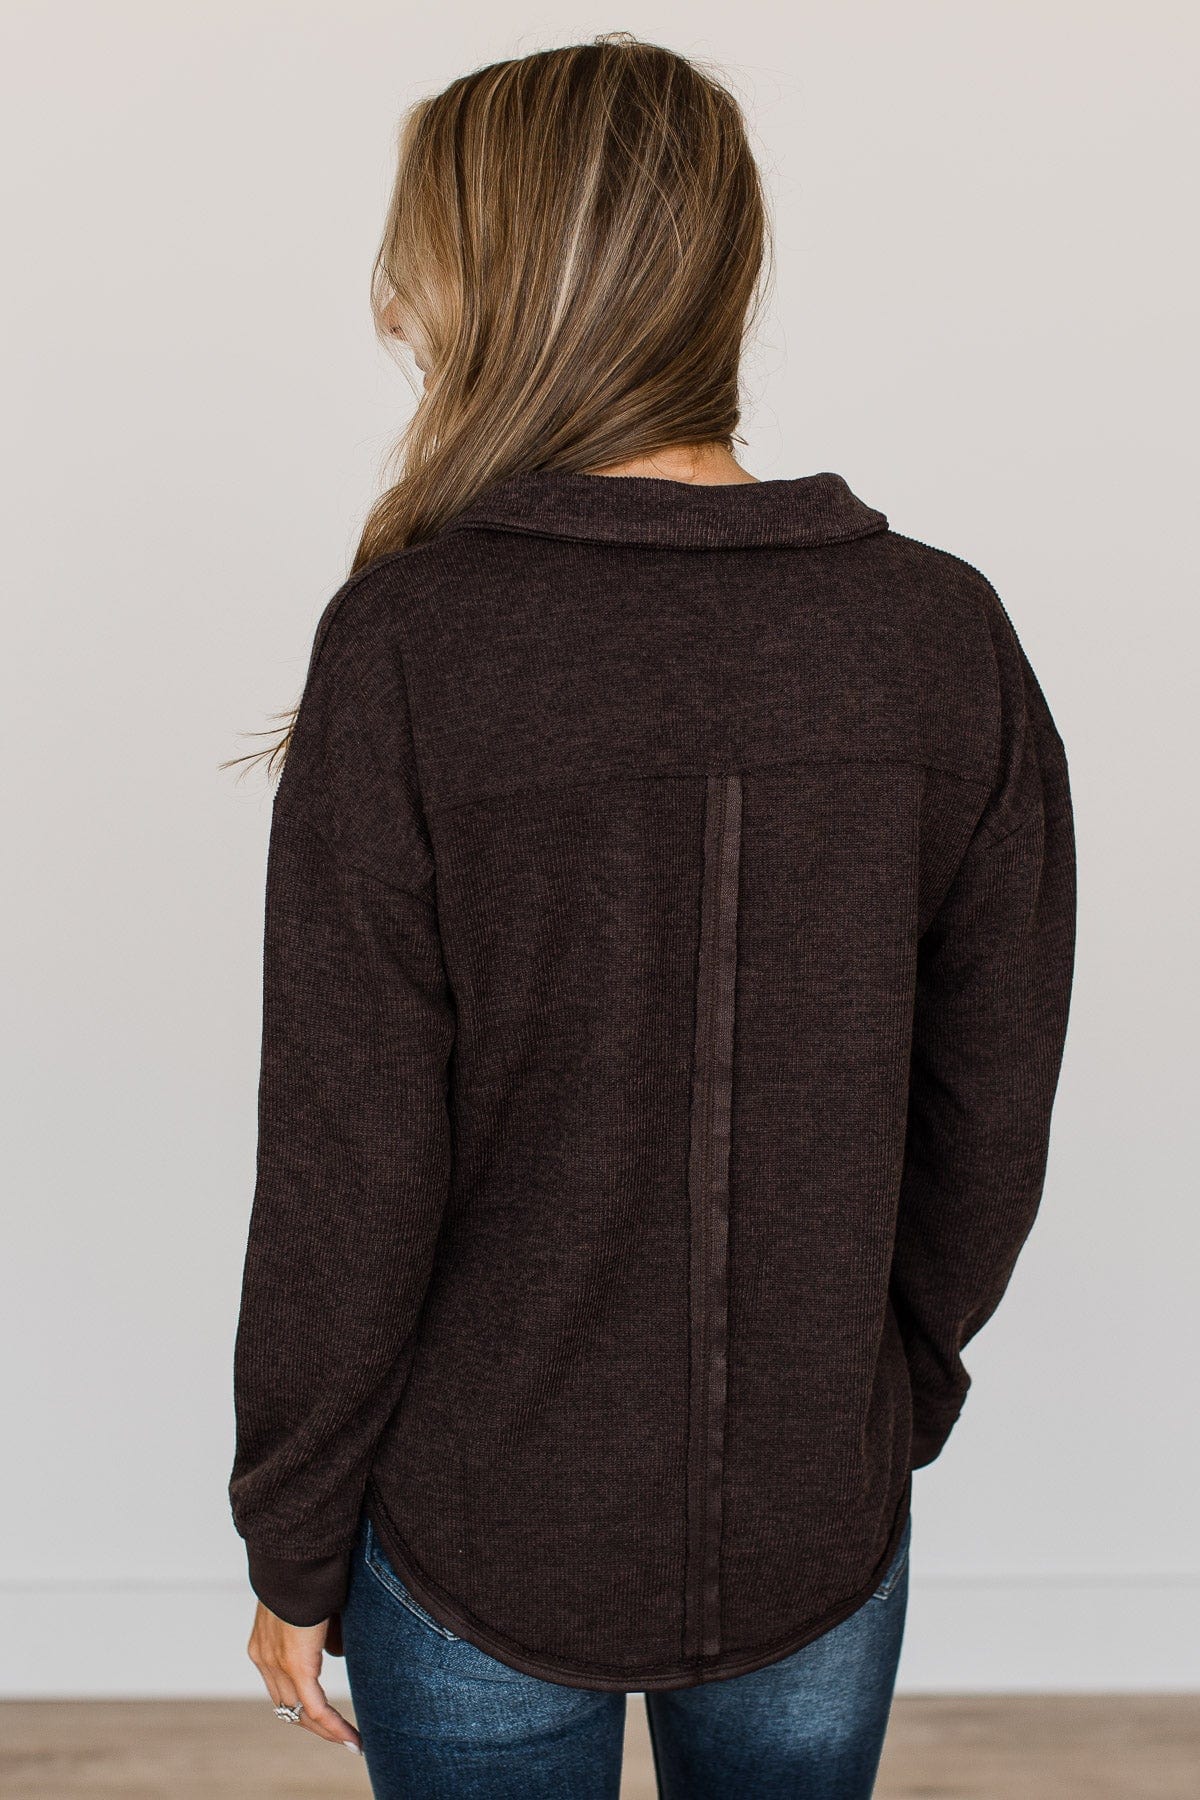 See For Yourself Pocket Top- Dark Brown